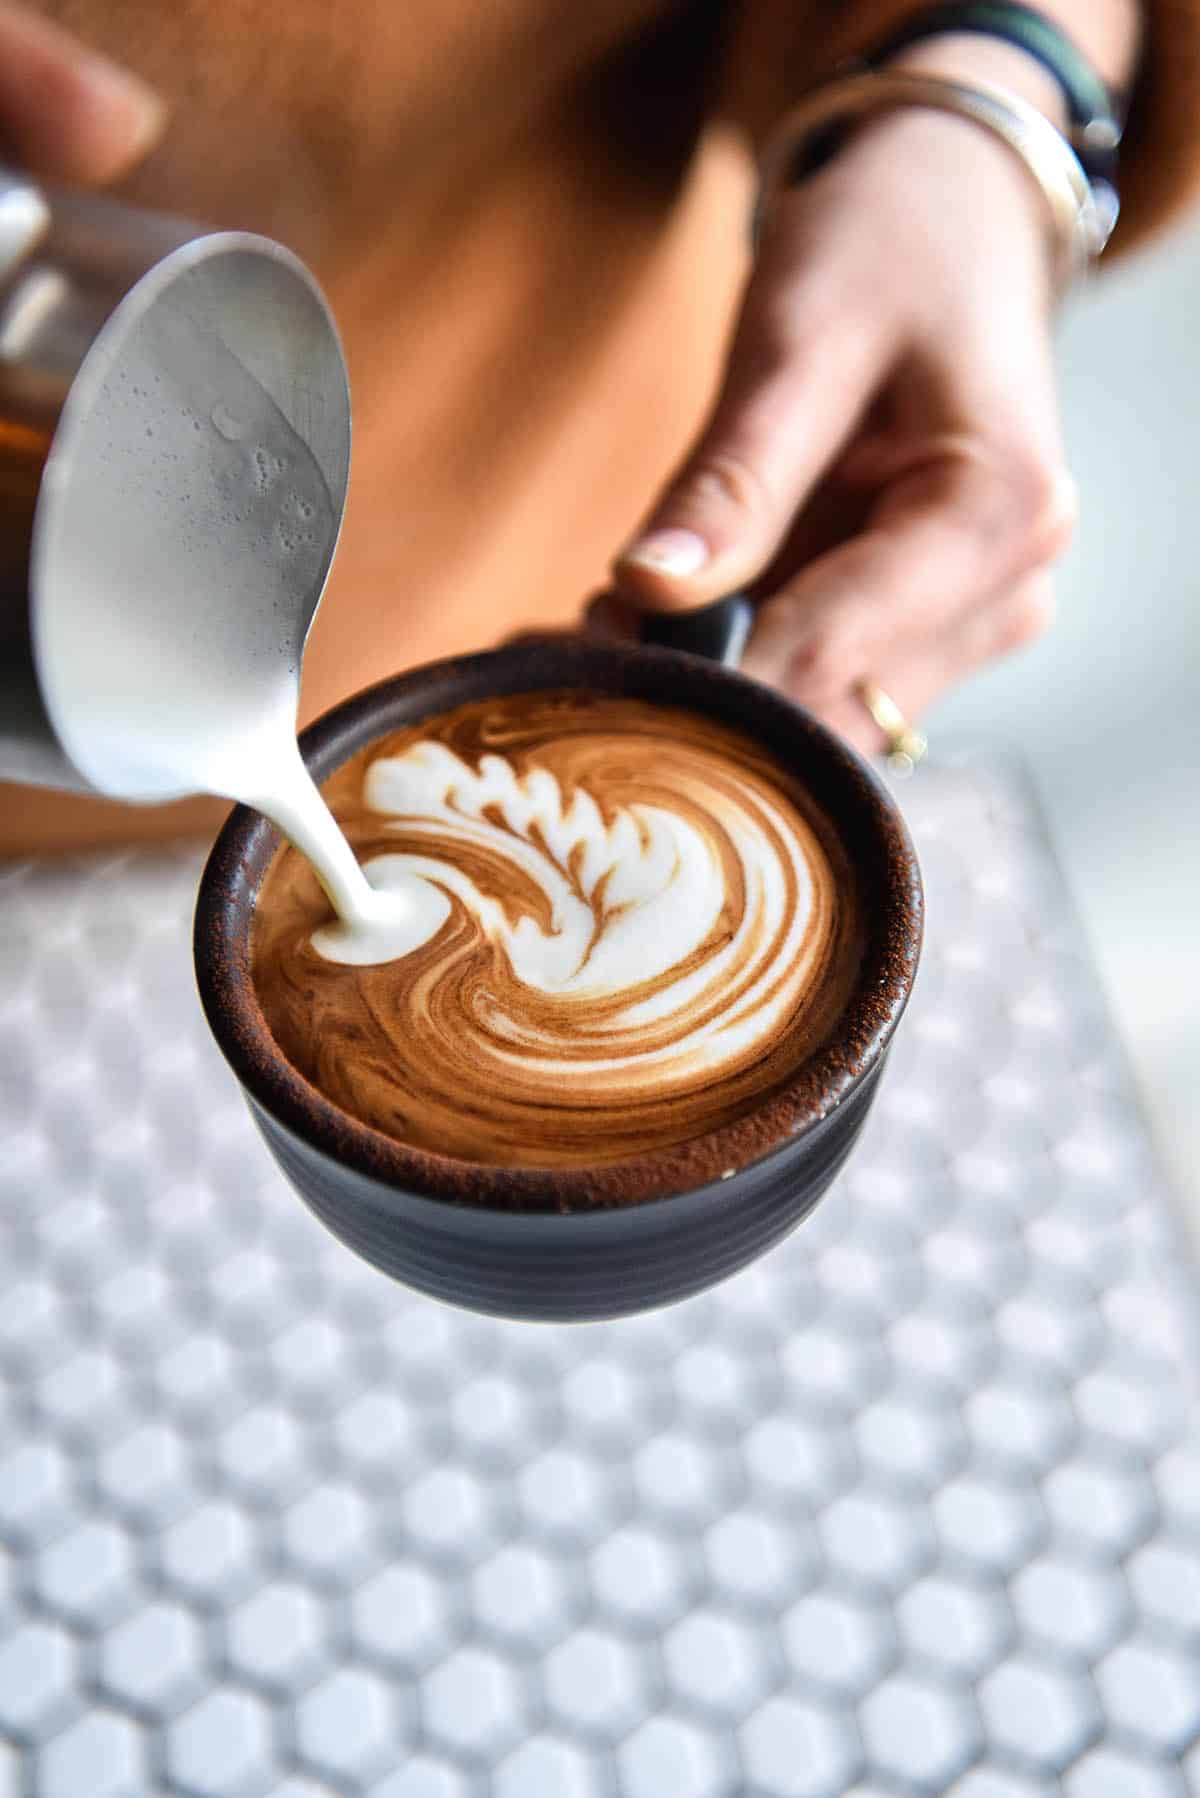 A close up image of a cappuccino being poured into a matte black mug. The cappuccino is being held over a white hexagonal tiled table and the person pouring it wears wings and an orange shirt. 